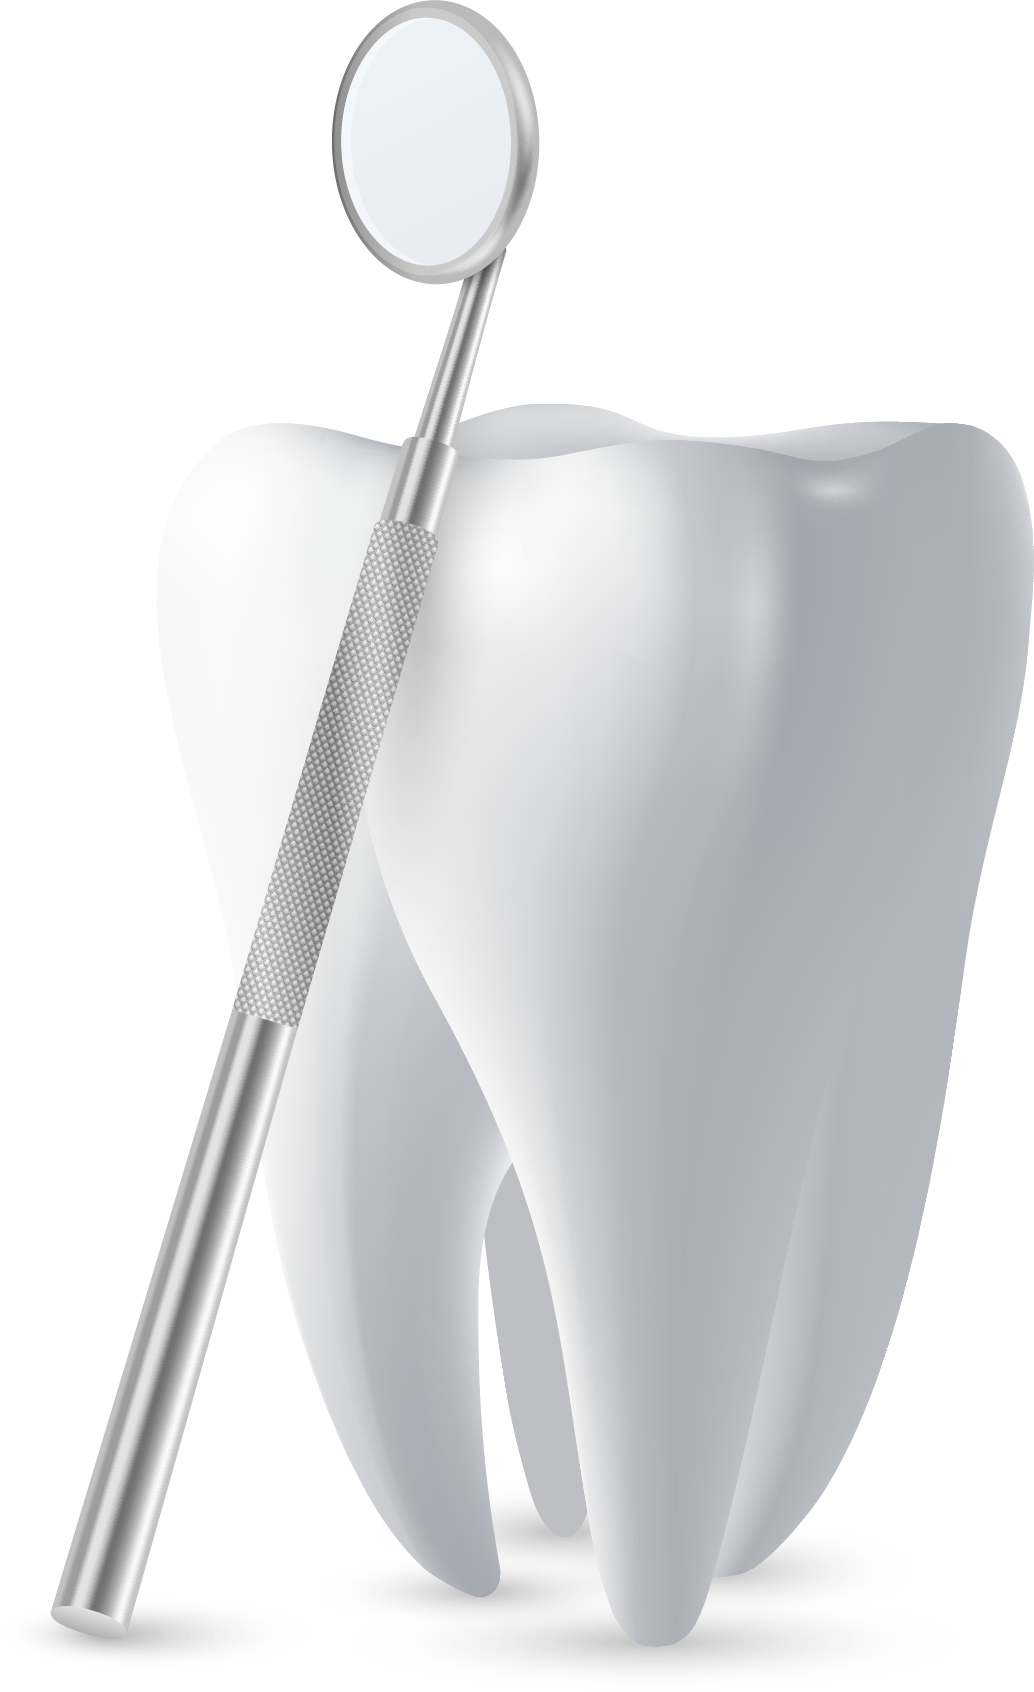 Tooth with Dentist Equipment 2 - Charlotte, NC - Northlake Dentistry